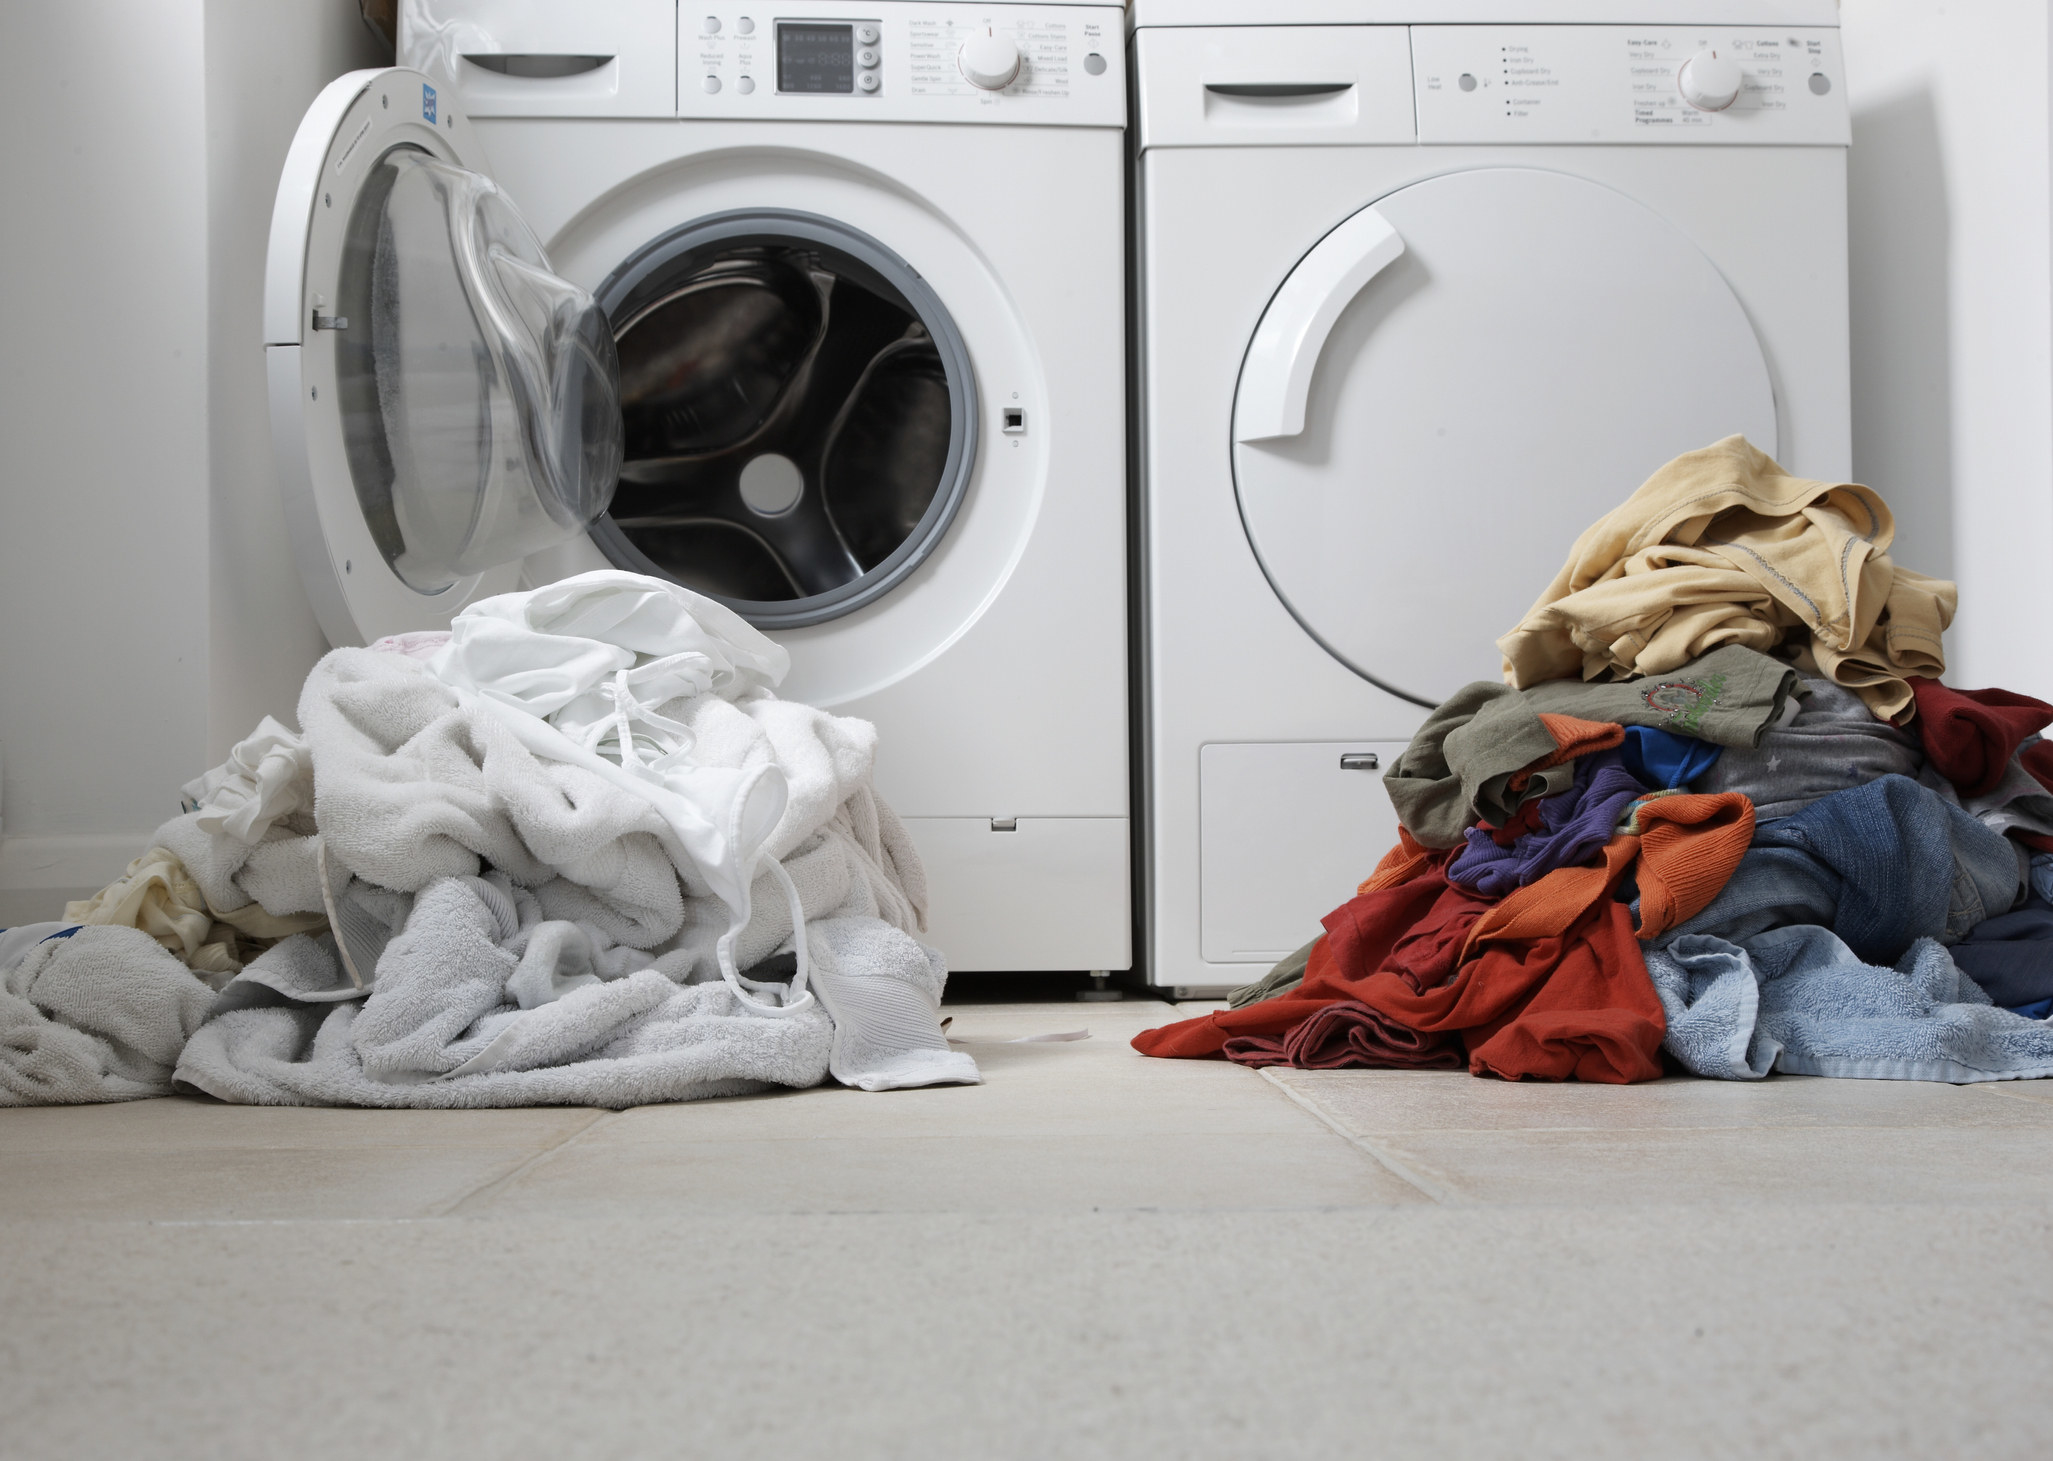 Two piles of clothes sit next to a washer and dryer